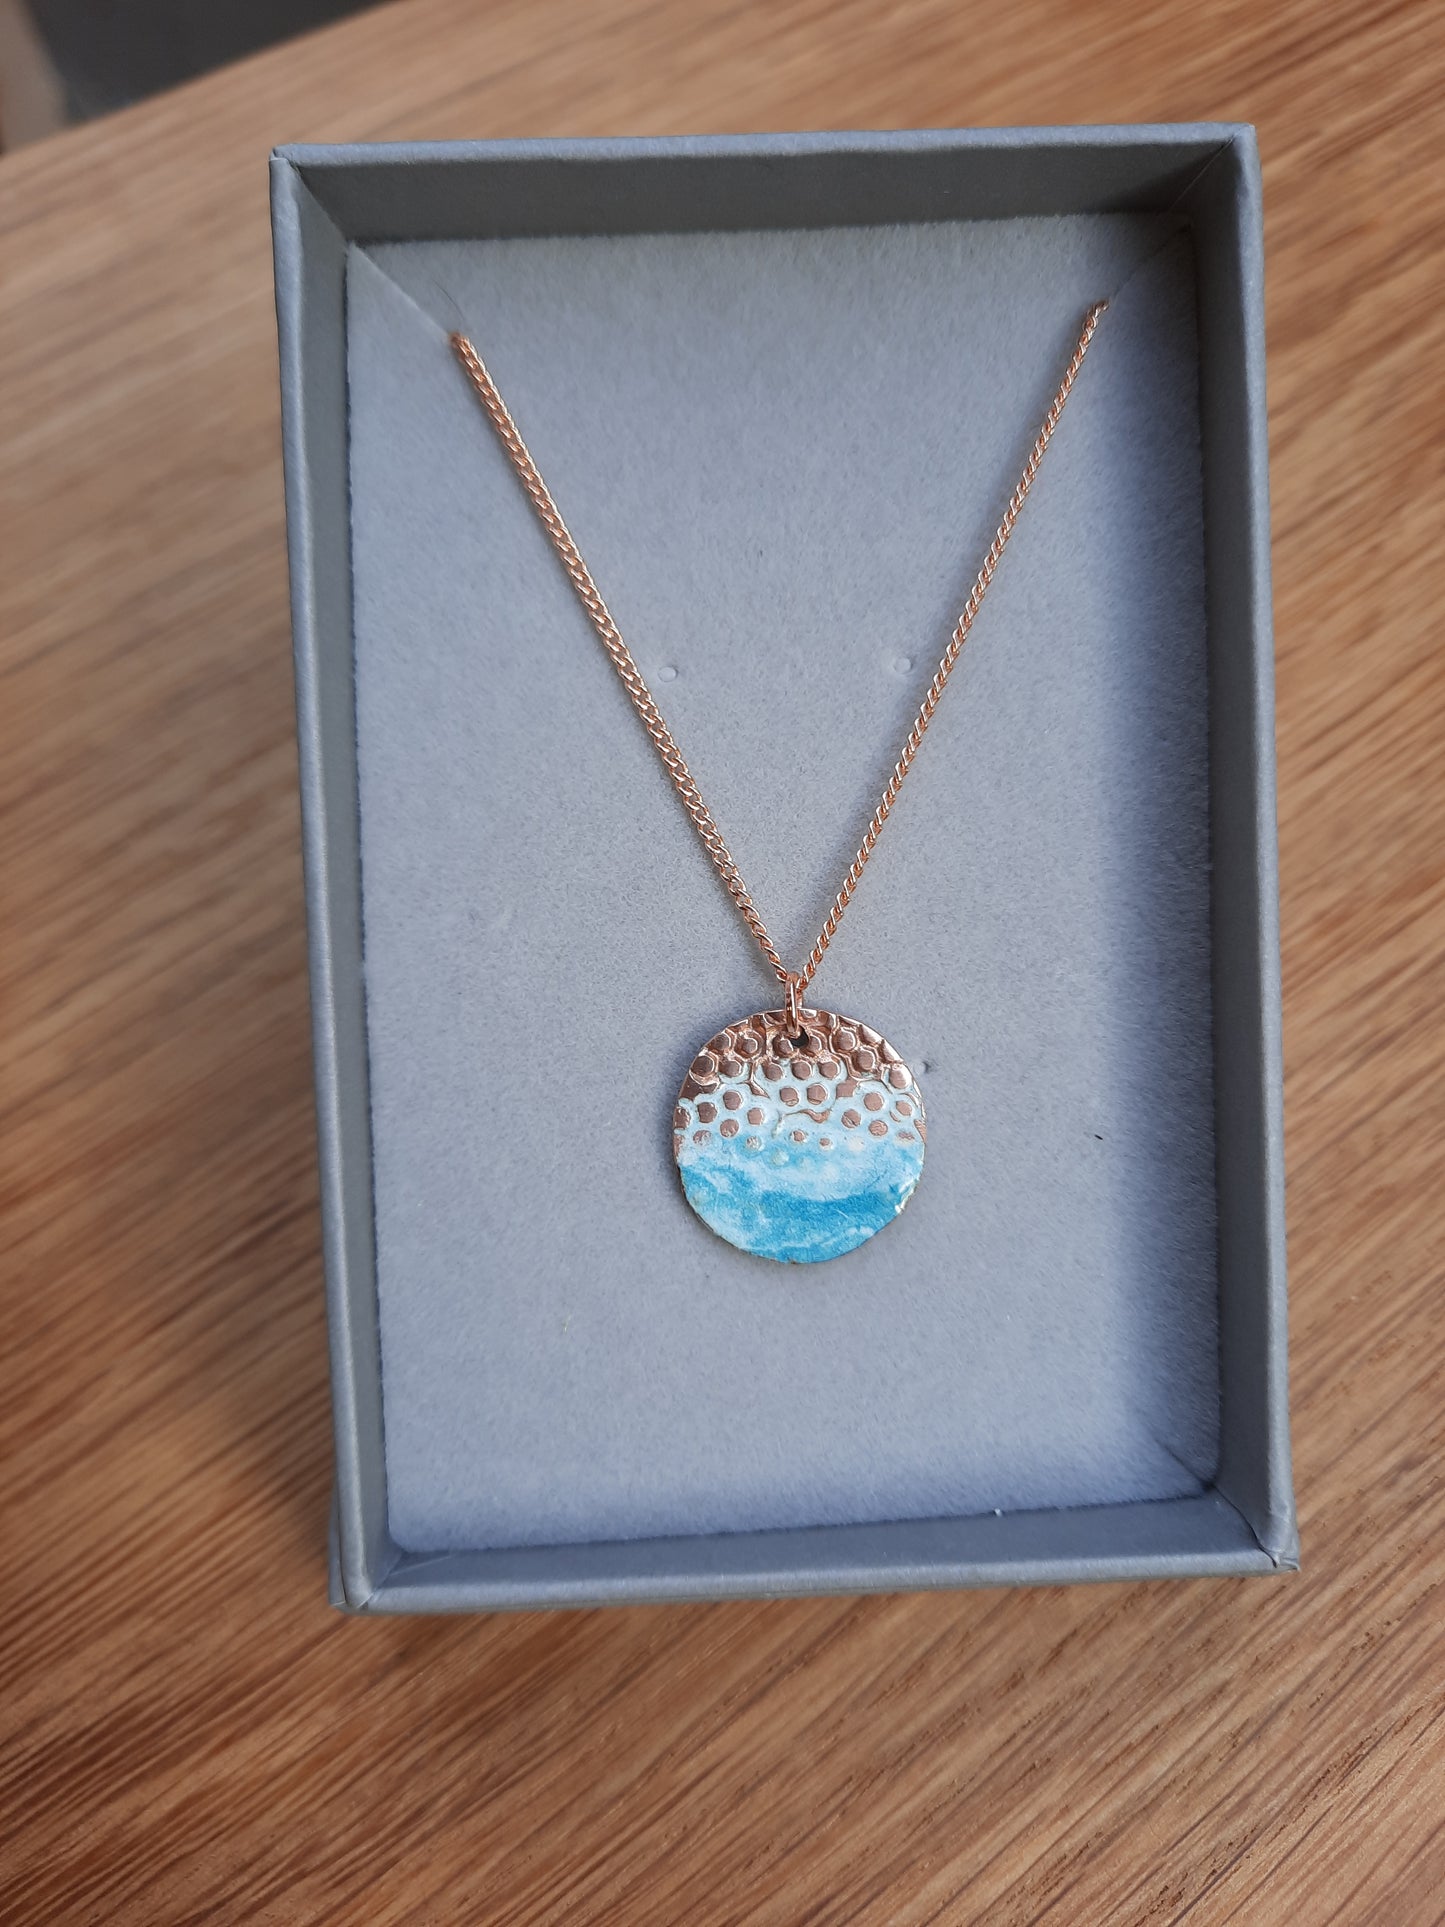 Circular Pendant - Textured and Enamelled Copper